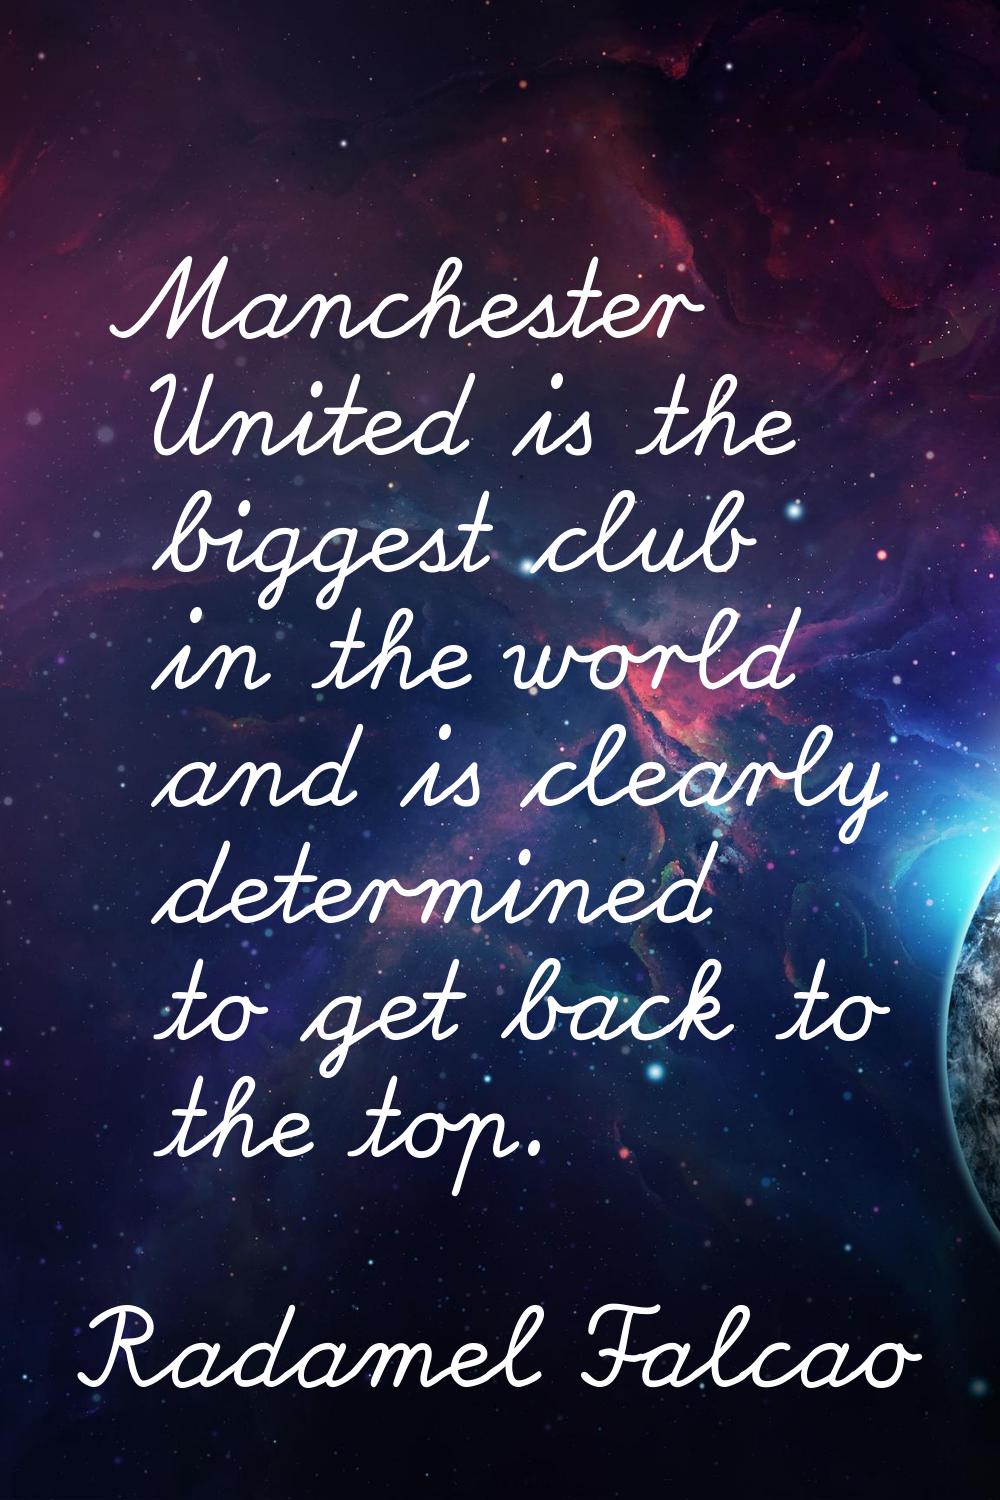 Manchester United is the biggest club in the world and is clearly determined to get back to the top